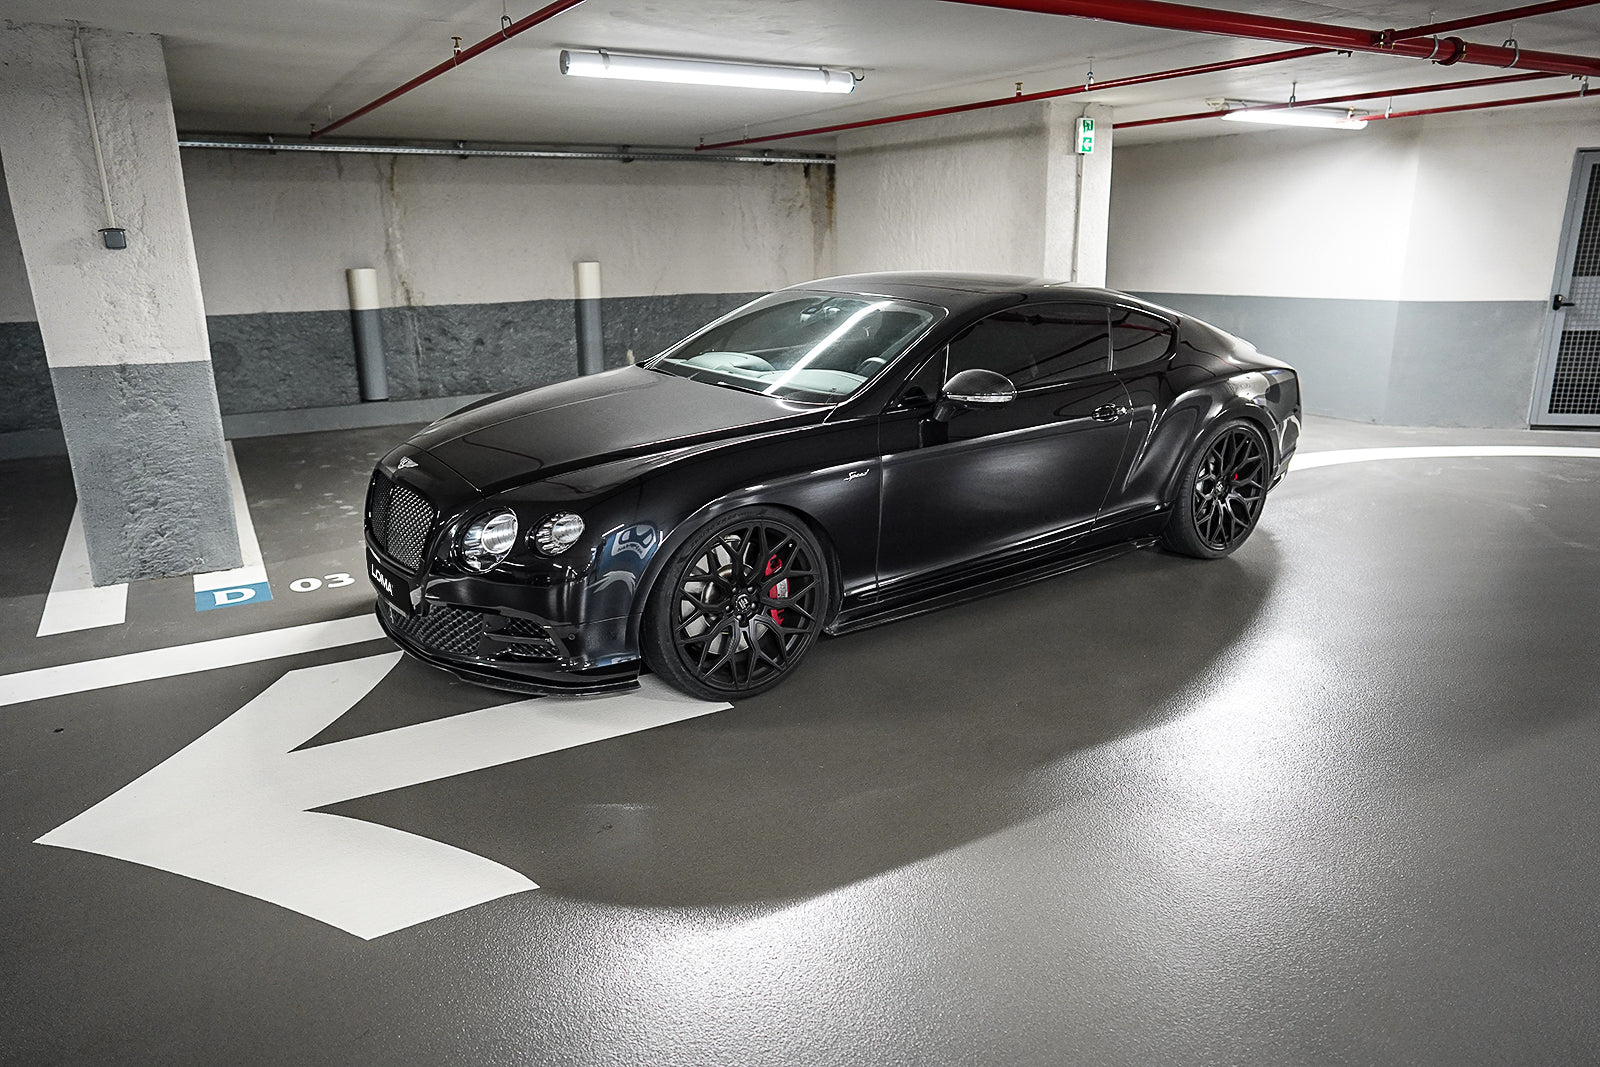 Profile view of black Bentley Continental GT with 22-inch custom rims